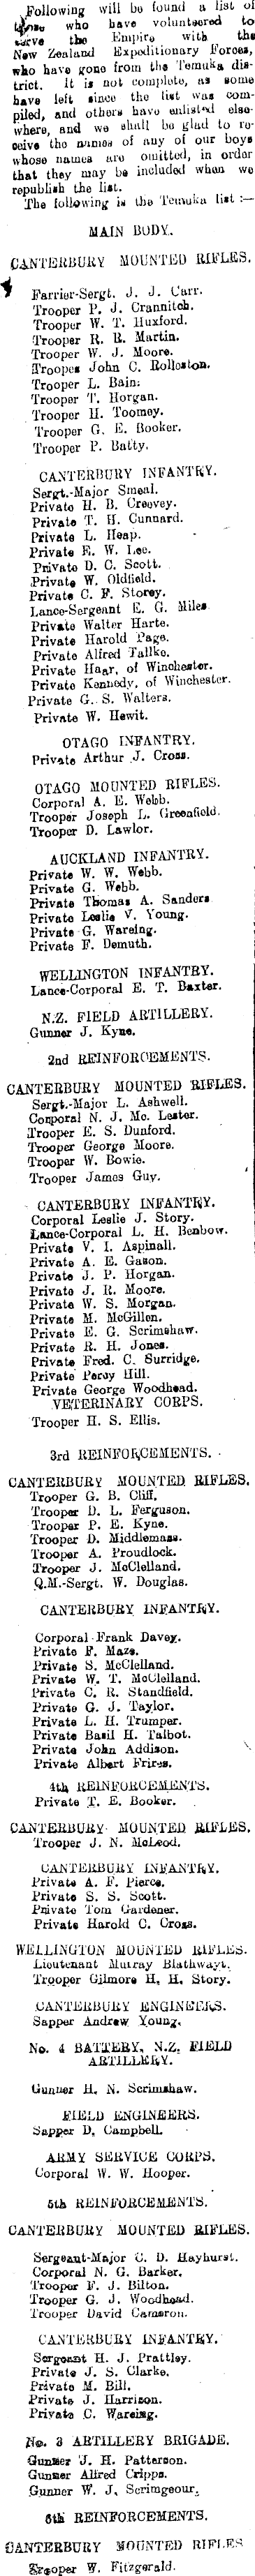 Papers Past Newspapers Temuka Leader January 1917 Active Service List